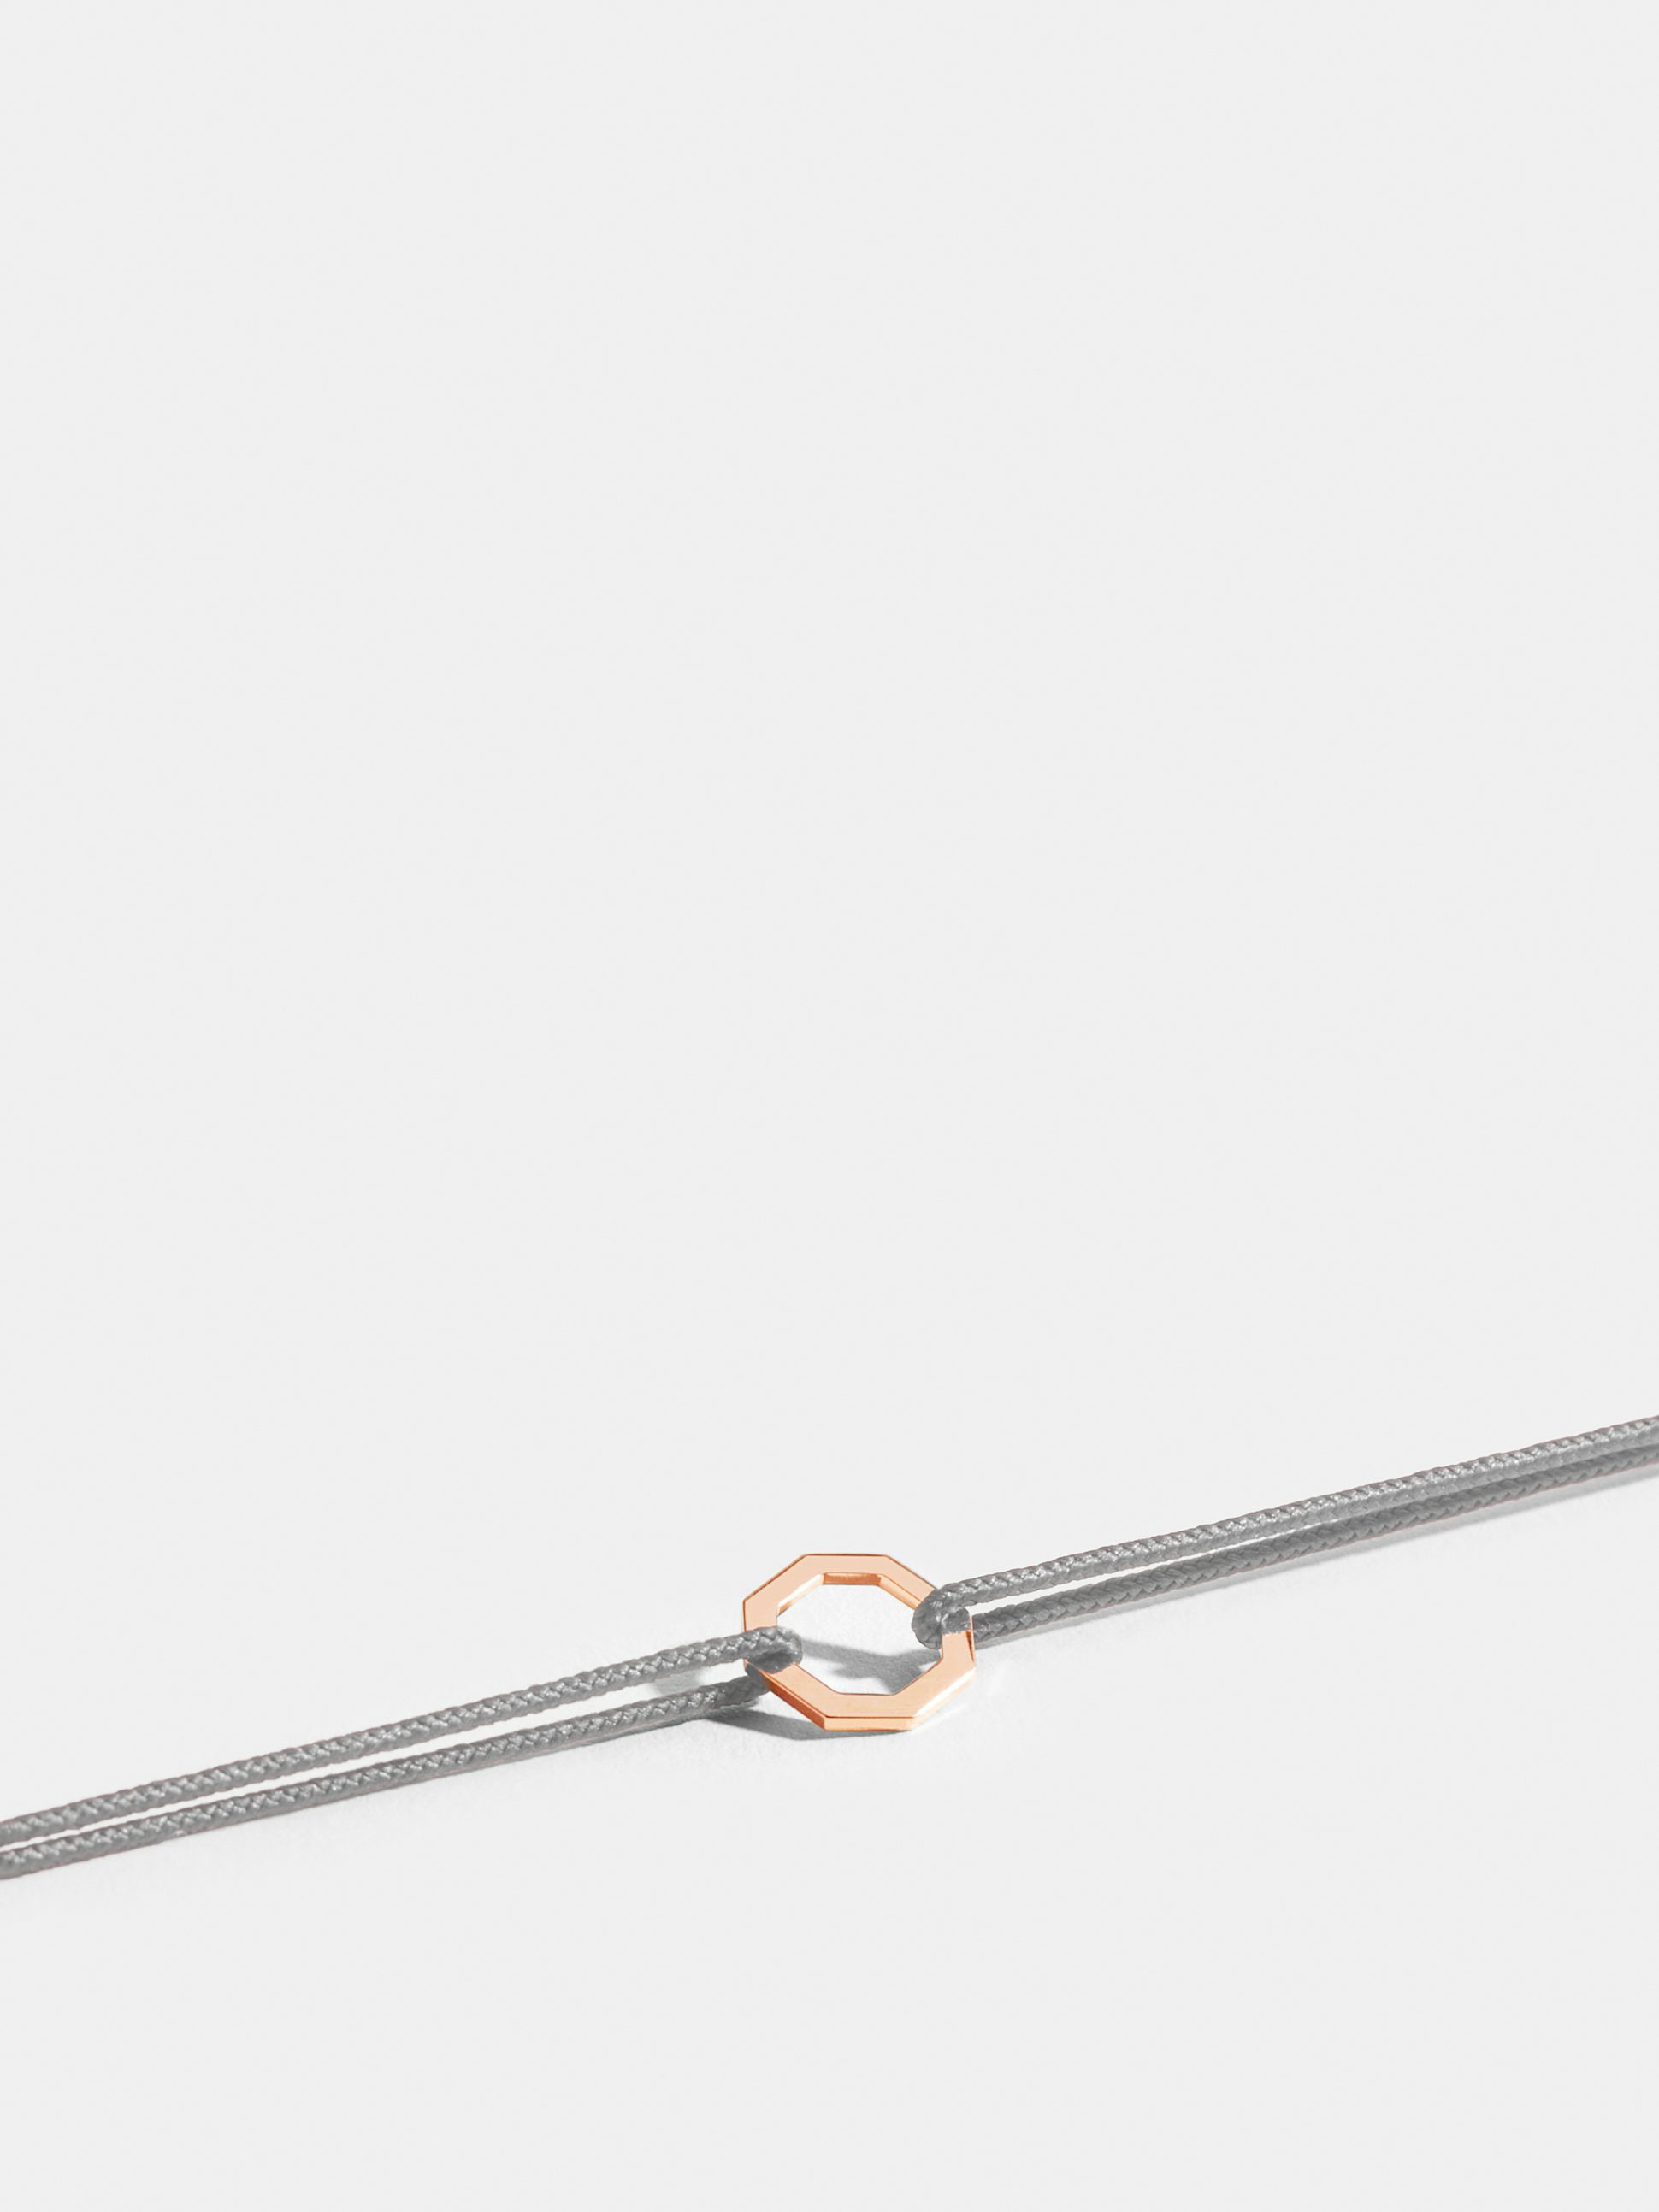 Octogone motif in 18k Fairmined ethical rose gold, on a pearl grey cord. 